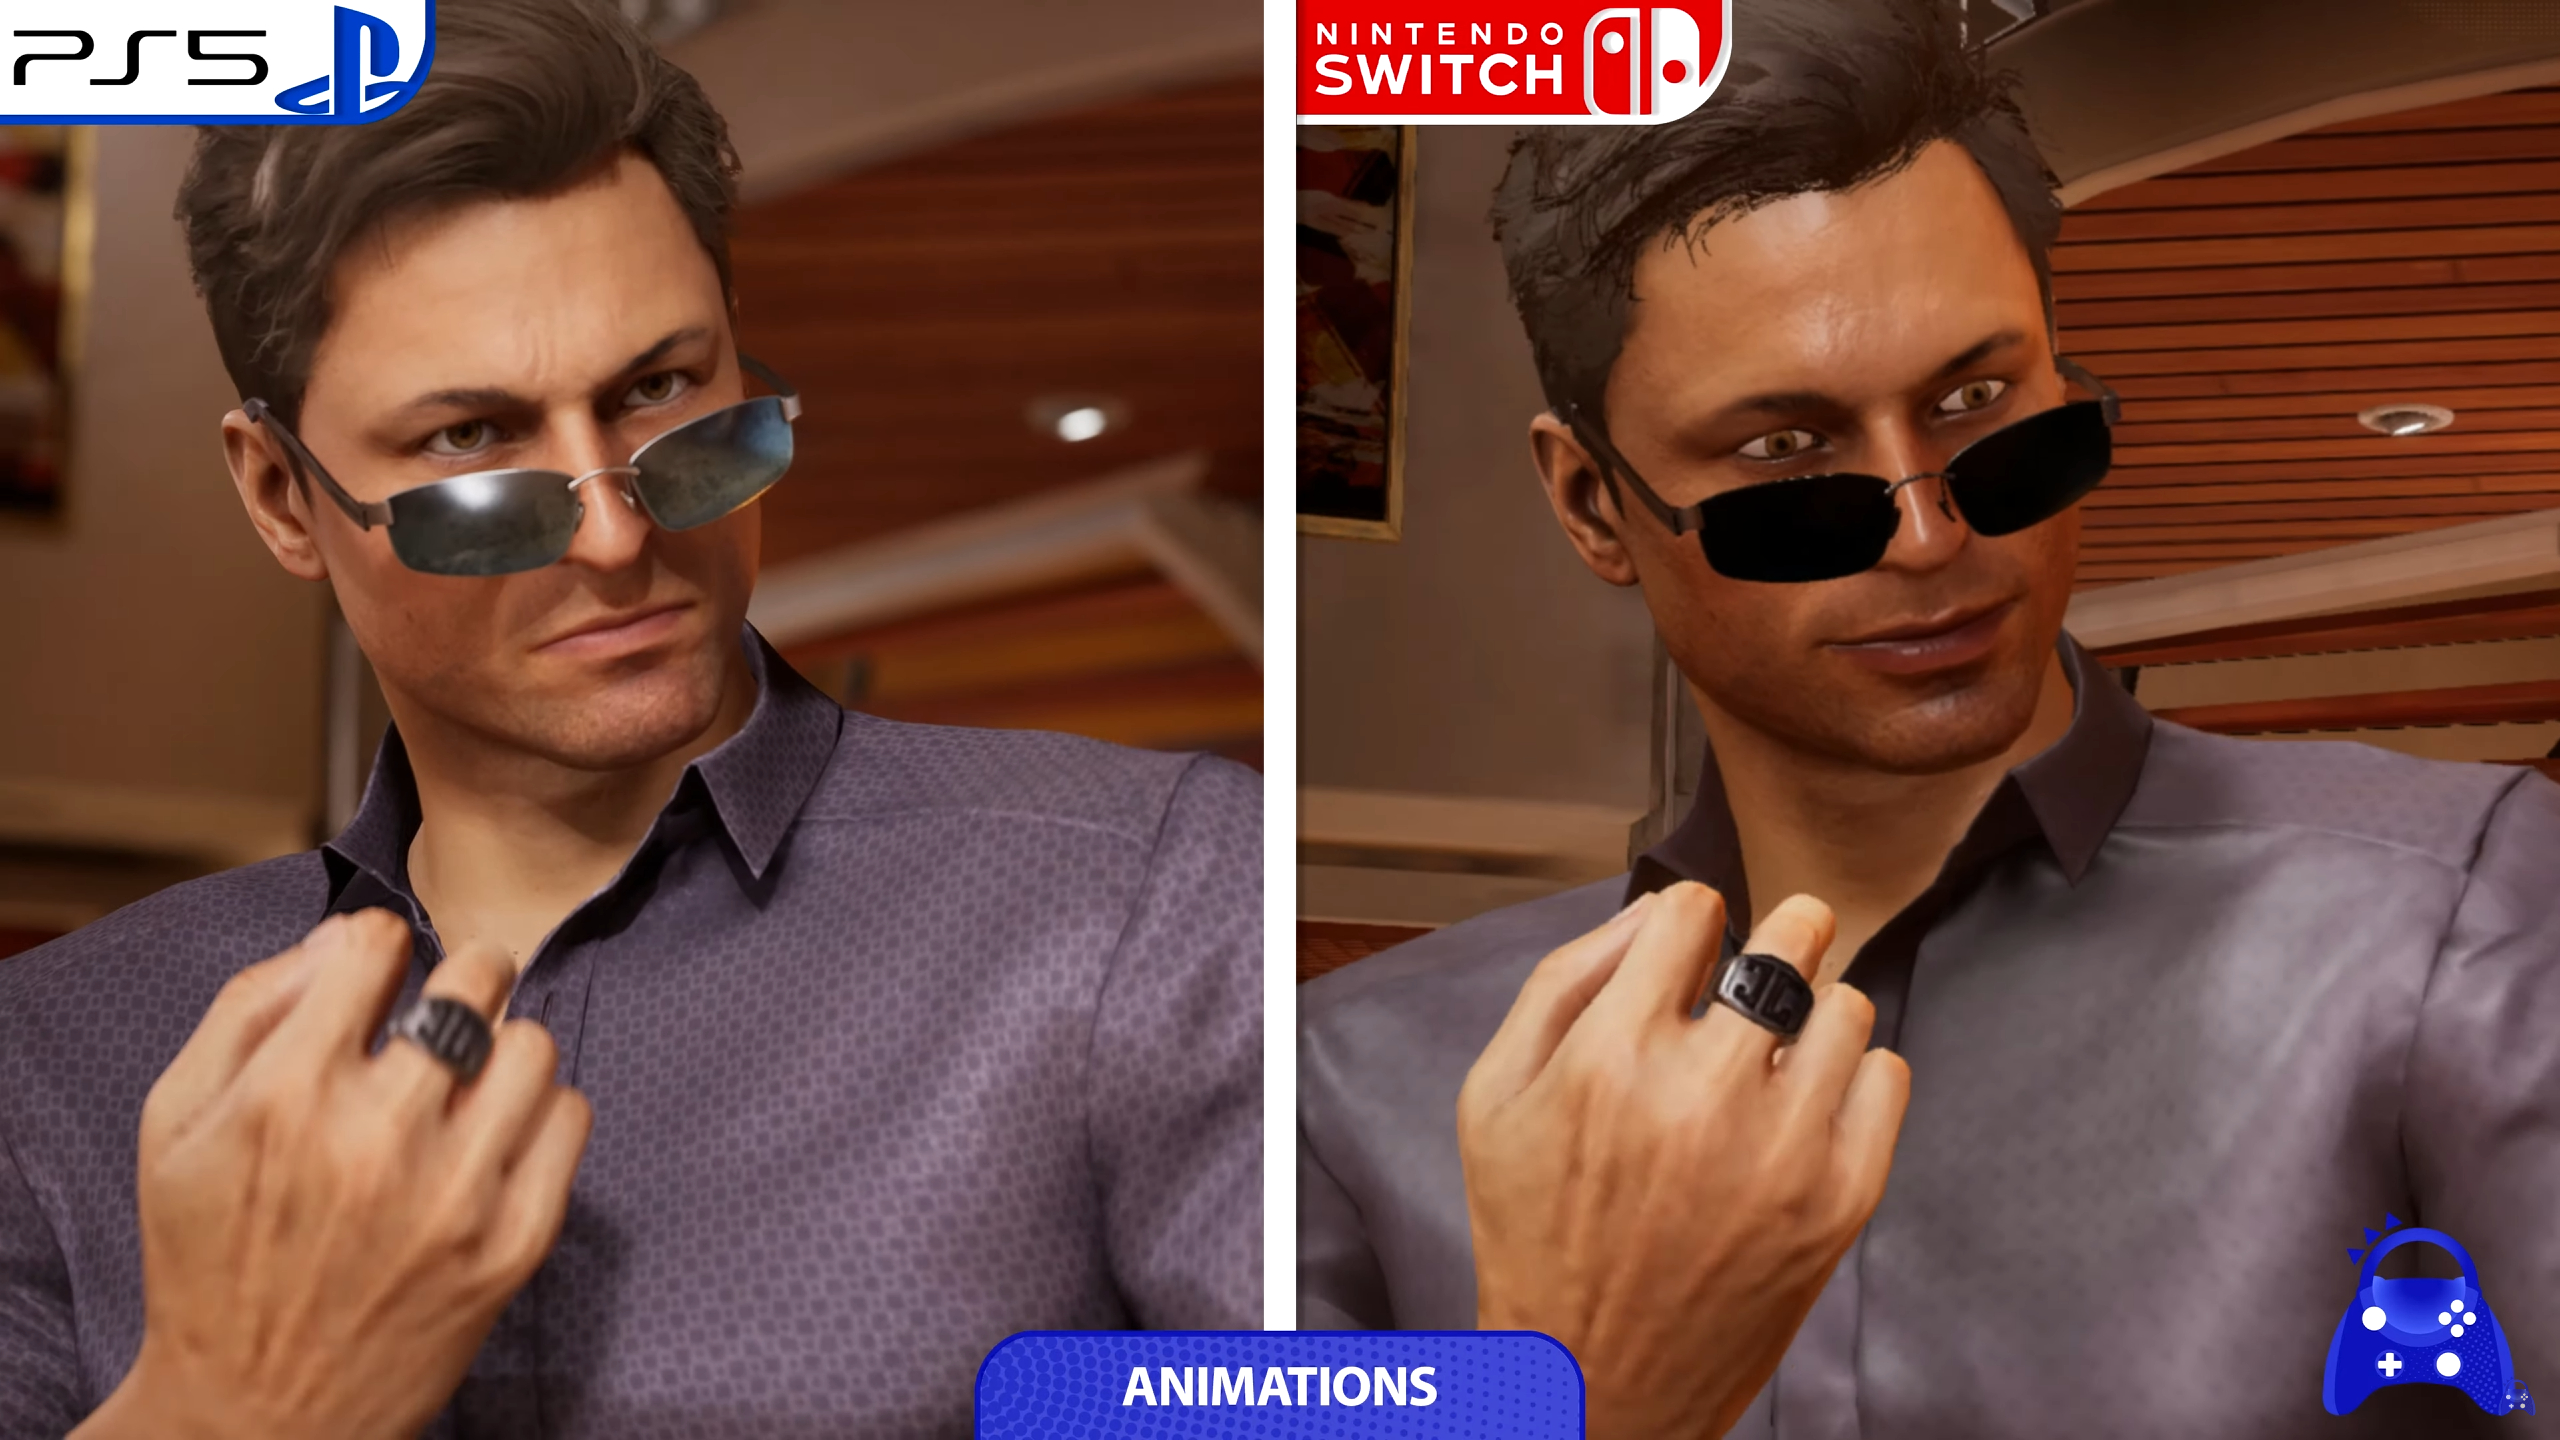 Johnny Cage MK1 Switch vs PS5